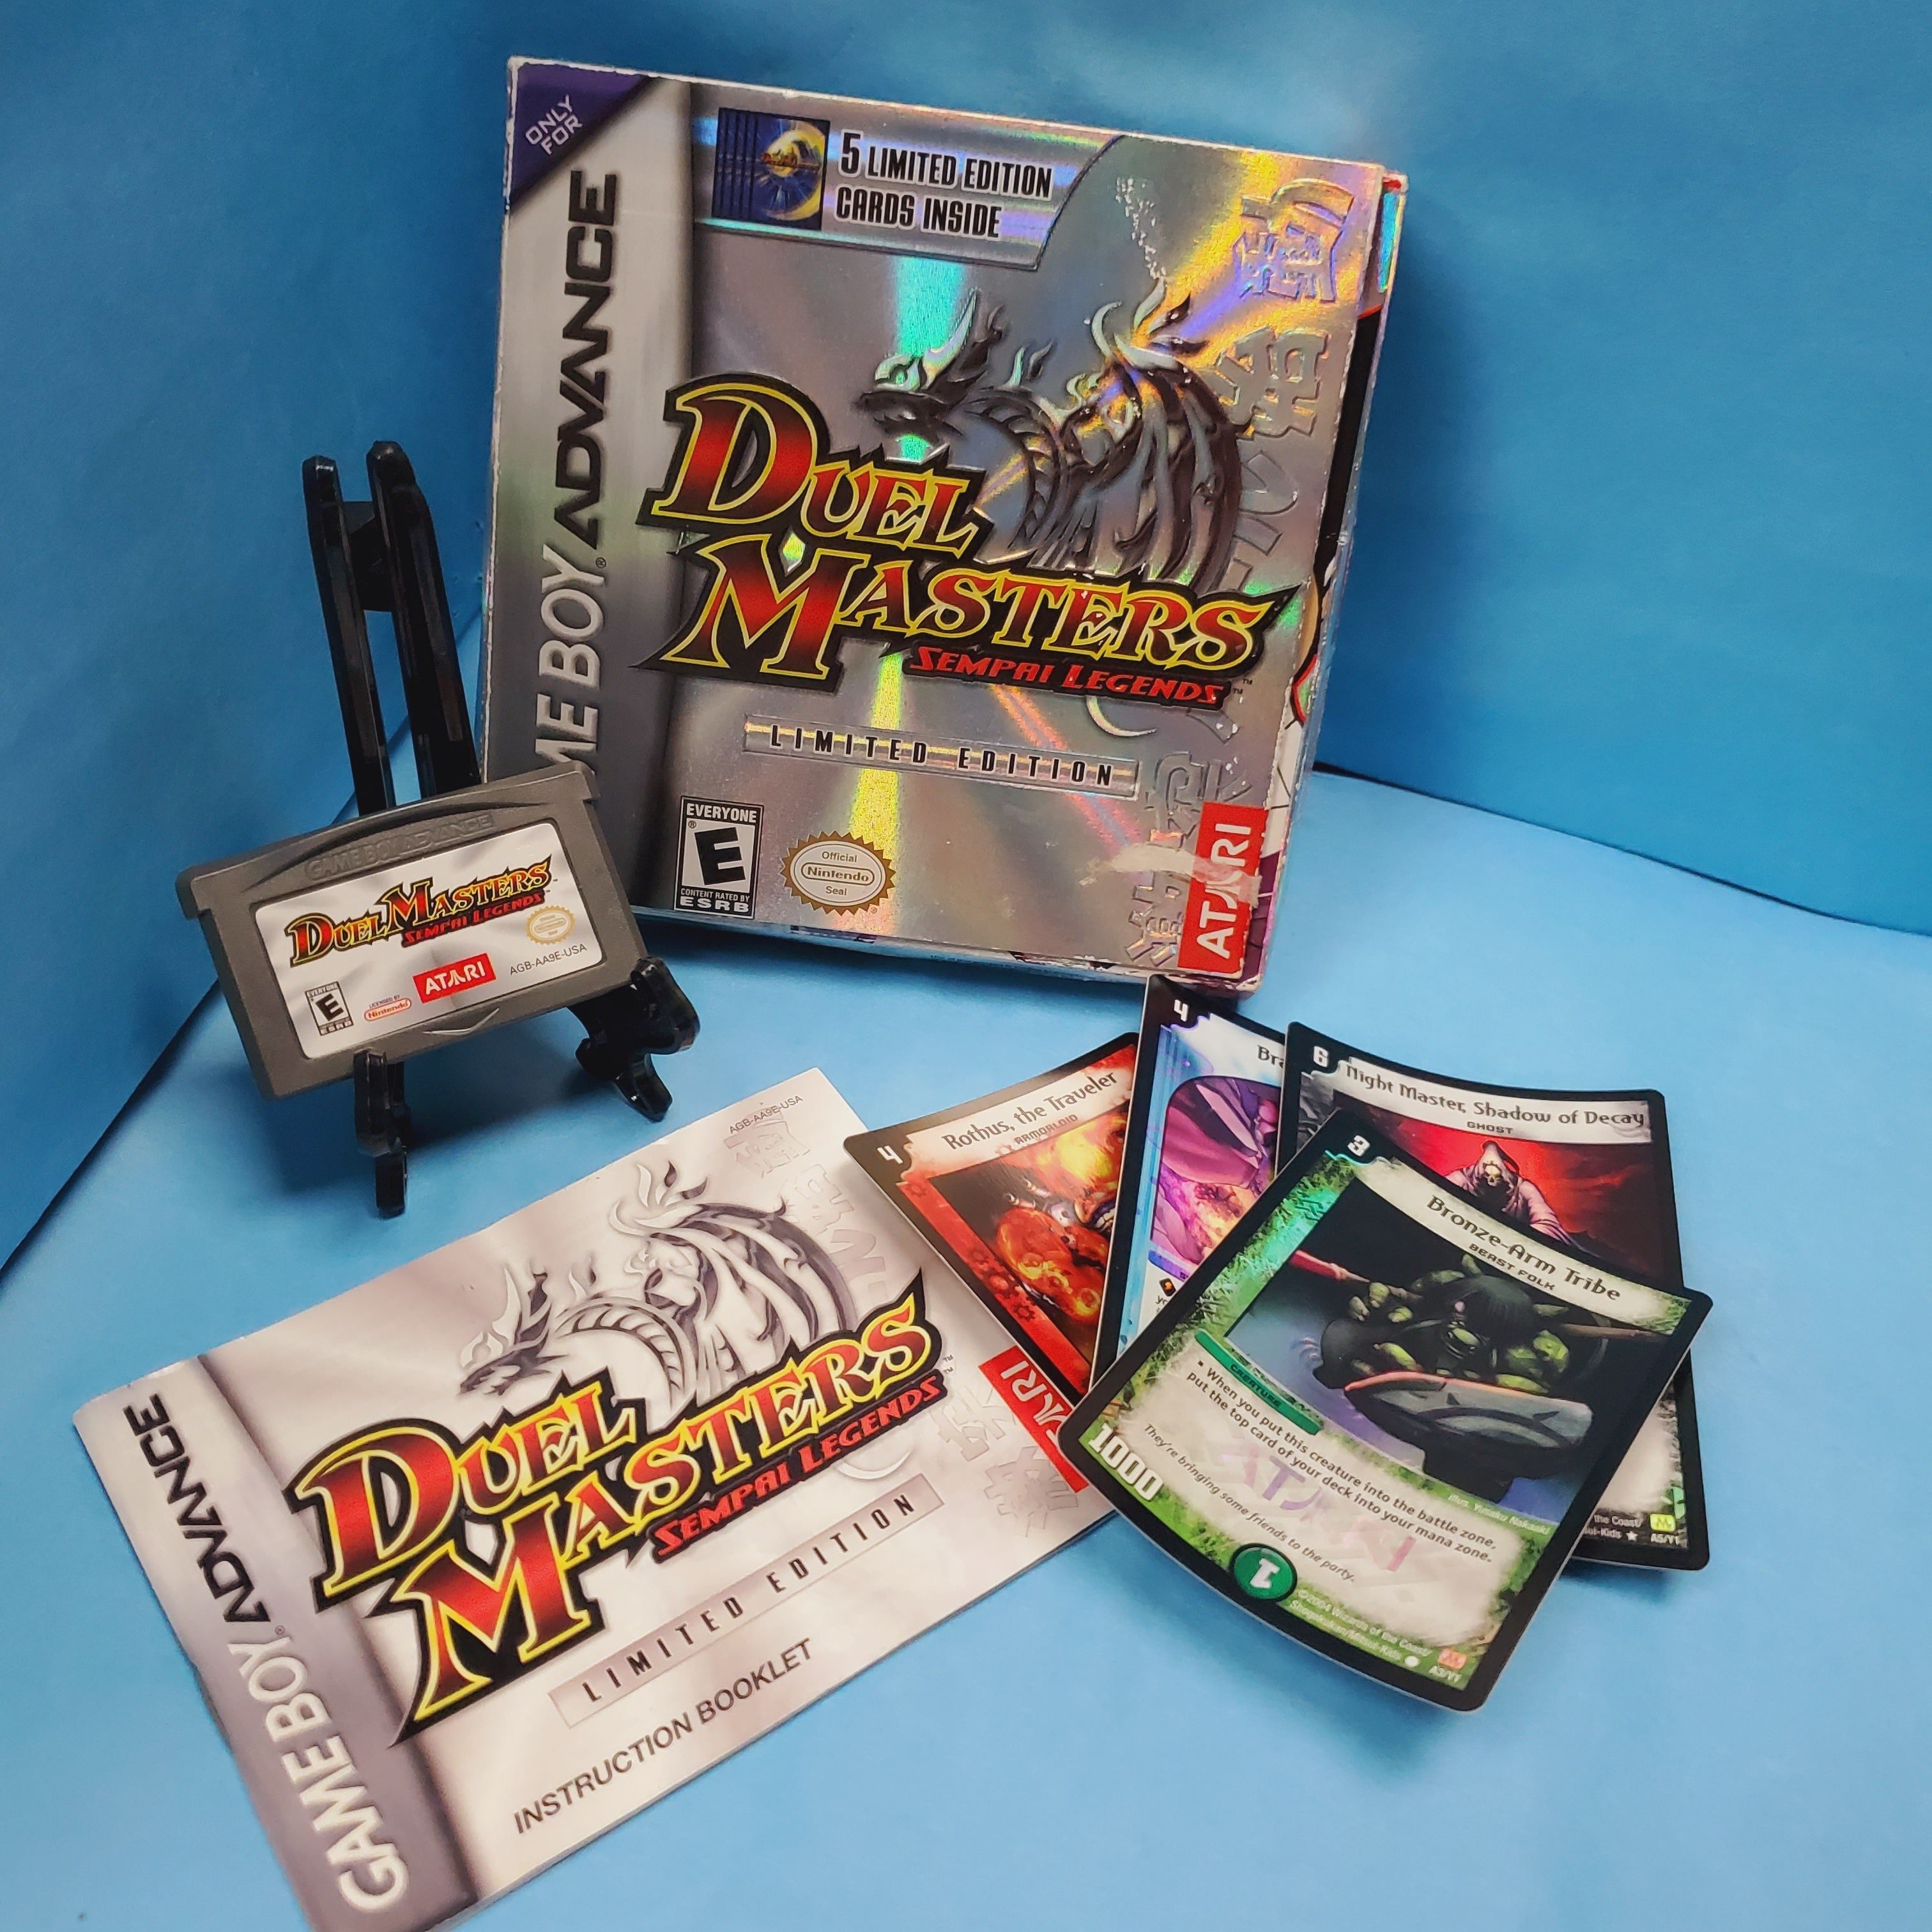 GBA - Duel Masters Sempai Legends Limited Edition (Complete in Box / C / With Manual)